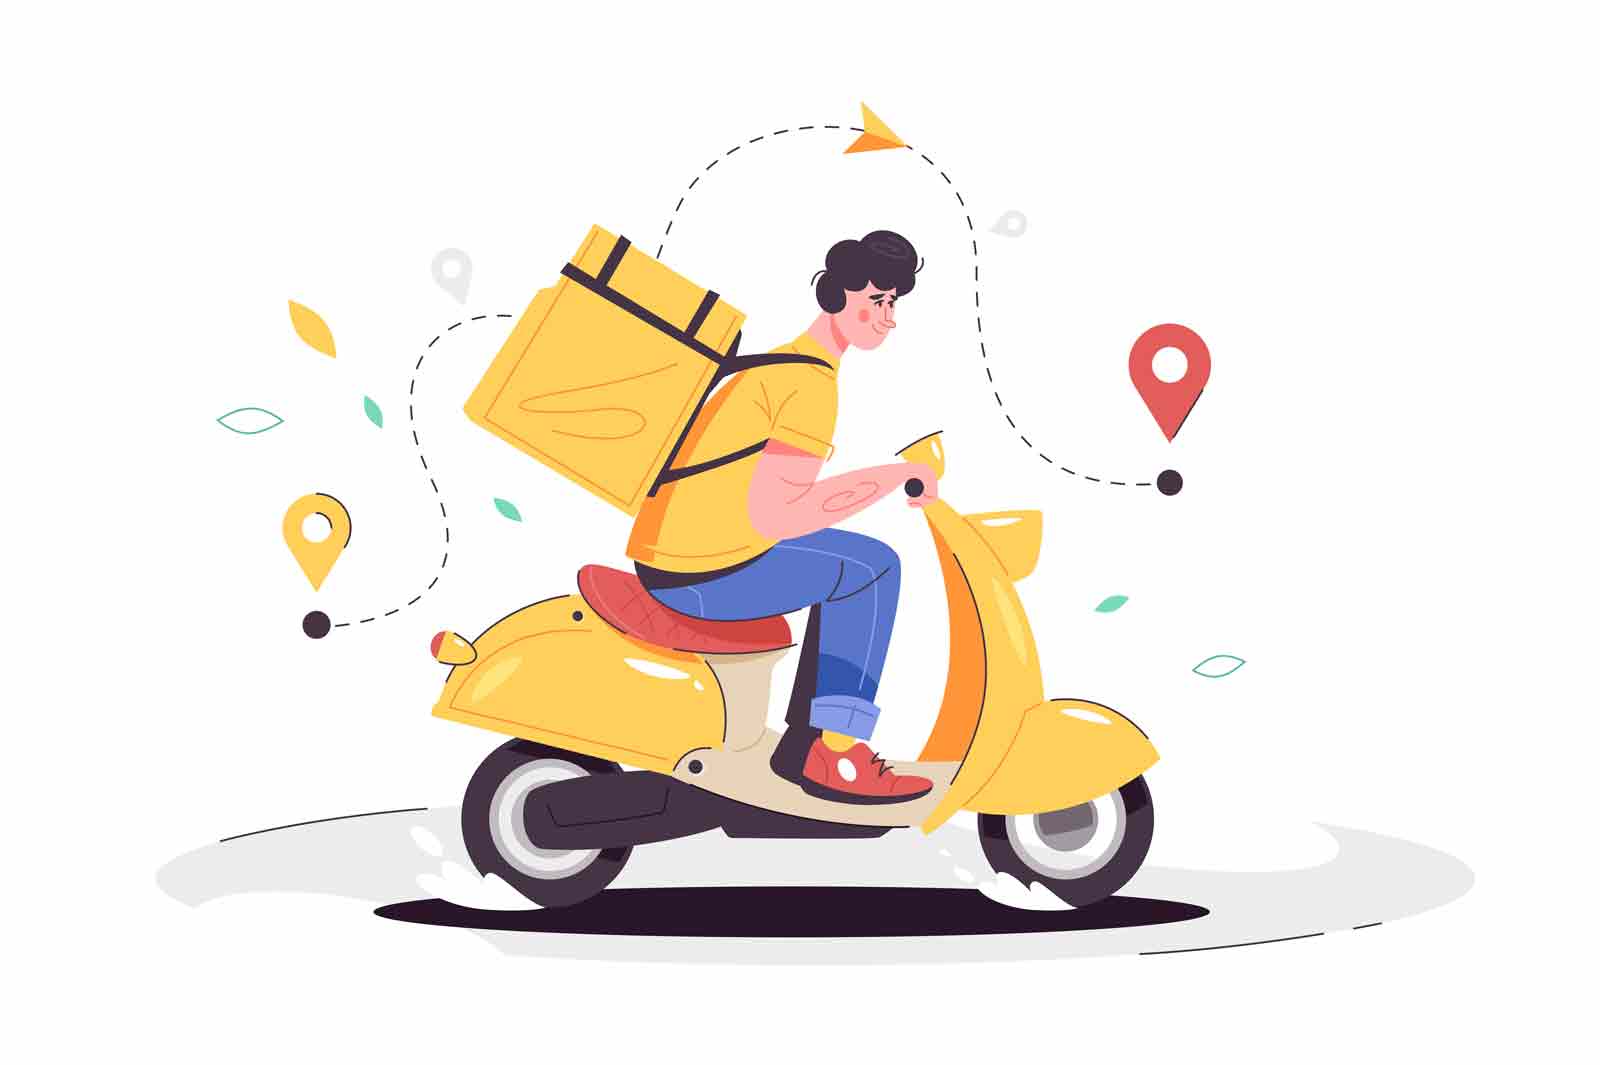 Fast and free delivery by scooter vector illustration. Follow way to receiver place flat style. Shipping, delivery service, courier concept